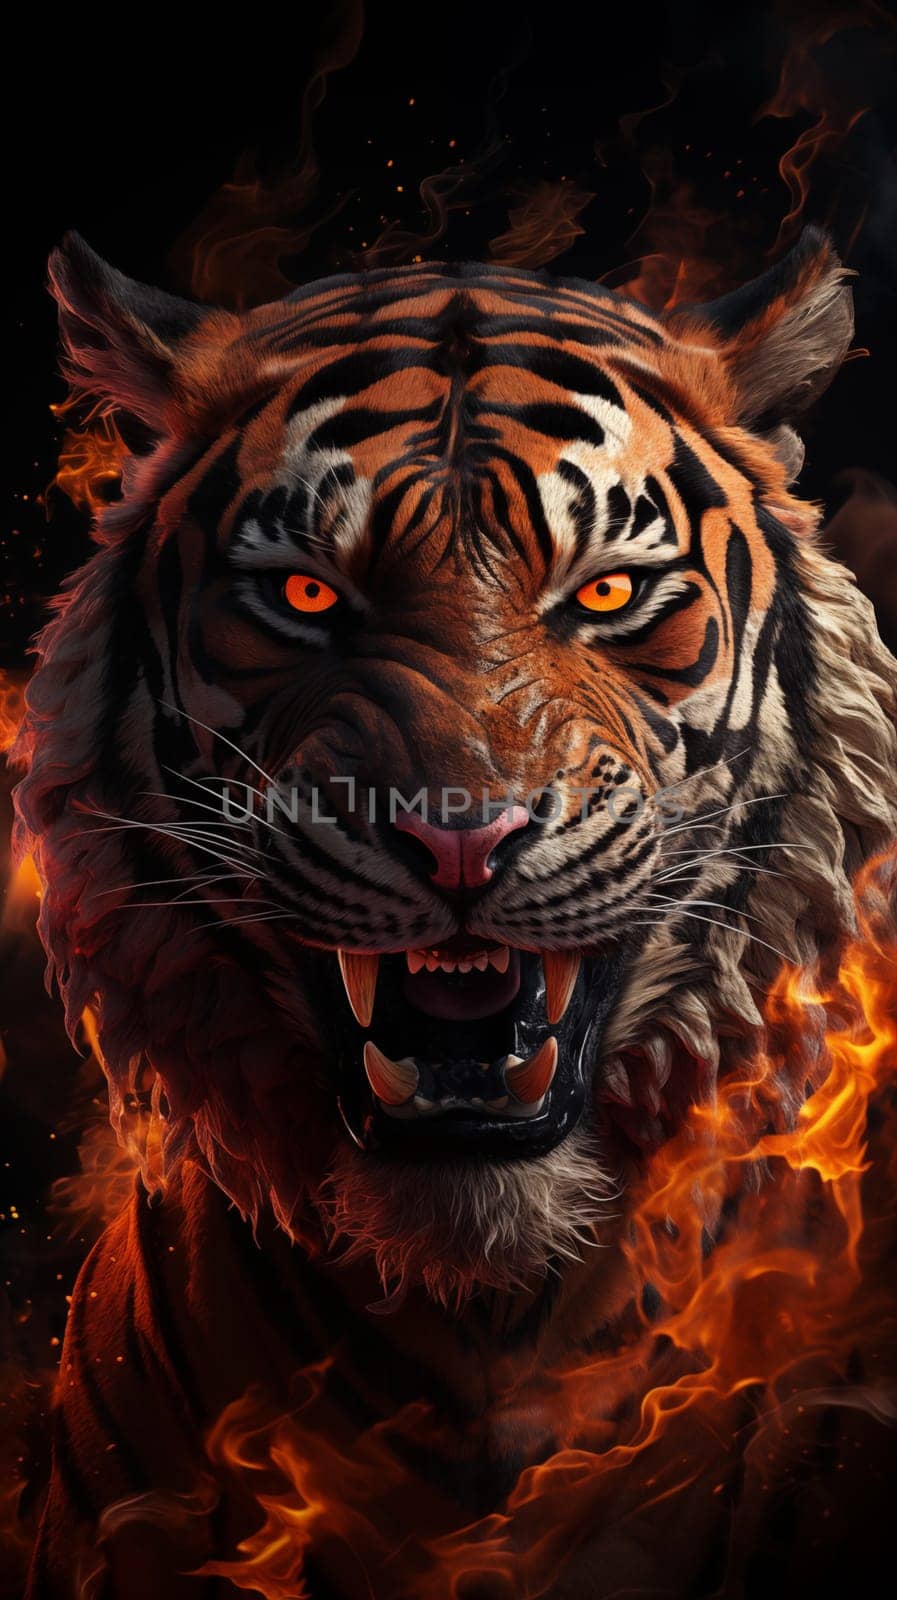 Front view of head of an angry, fiery tiger, on a black background. Vertical